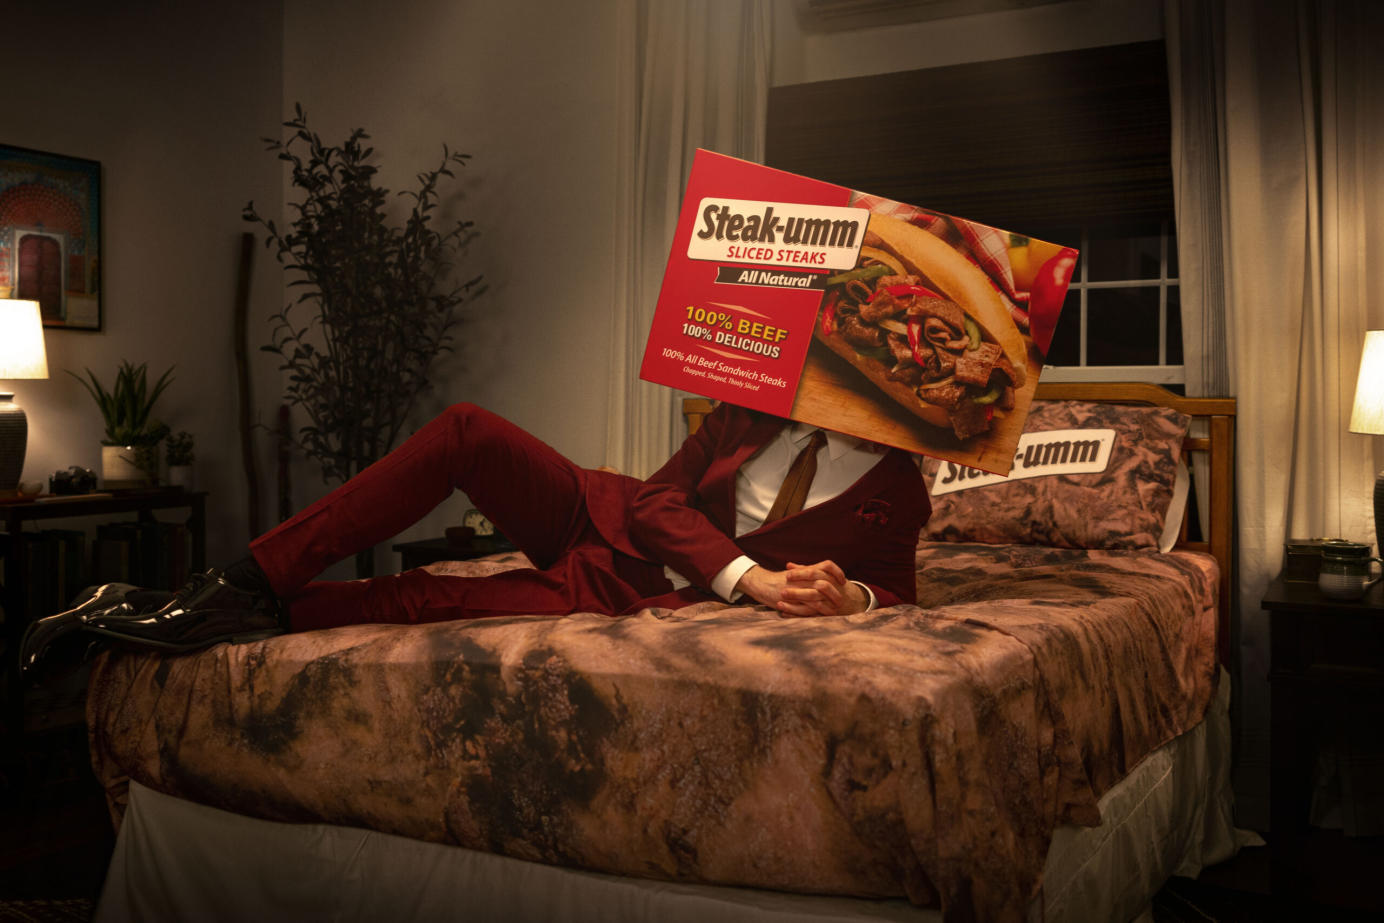 Steak-Umm Beef Sheets Campaign | Steak-Umm character laying on a bed covered in Beef Sheets